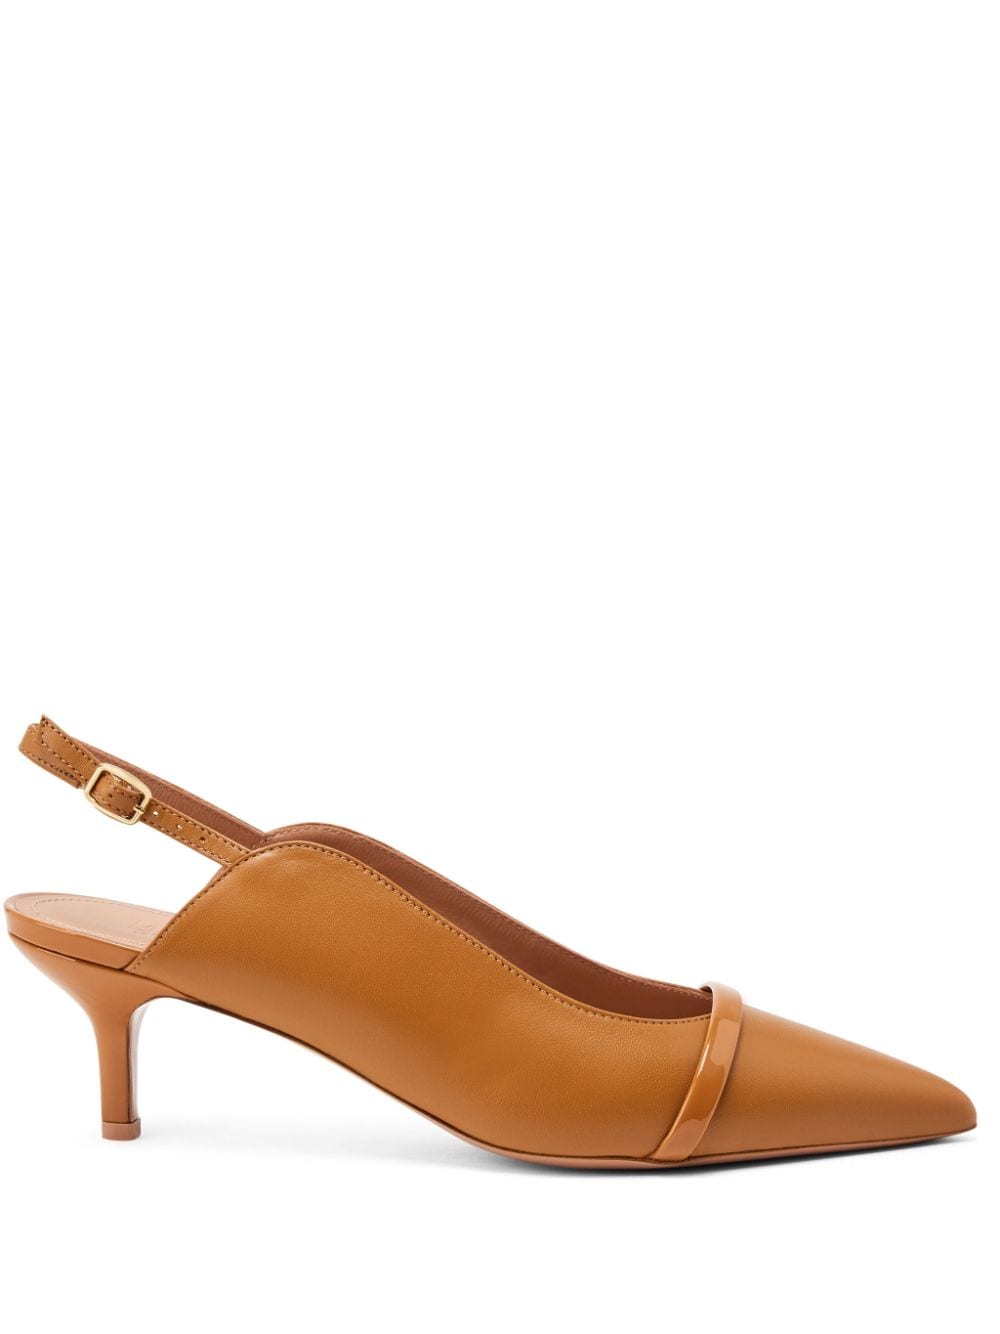 Malone Souliers 45mm Marion leather slingback pumps - Brown von Malone Souliers